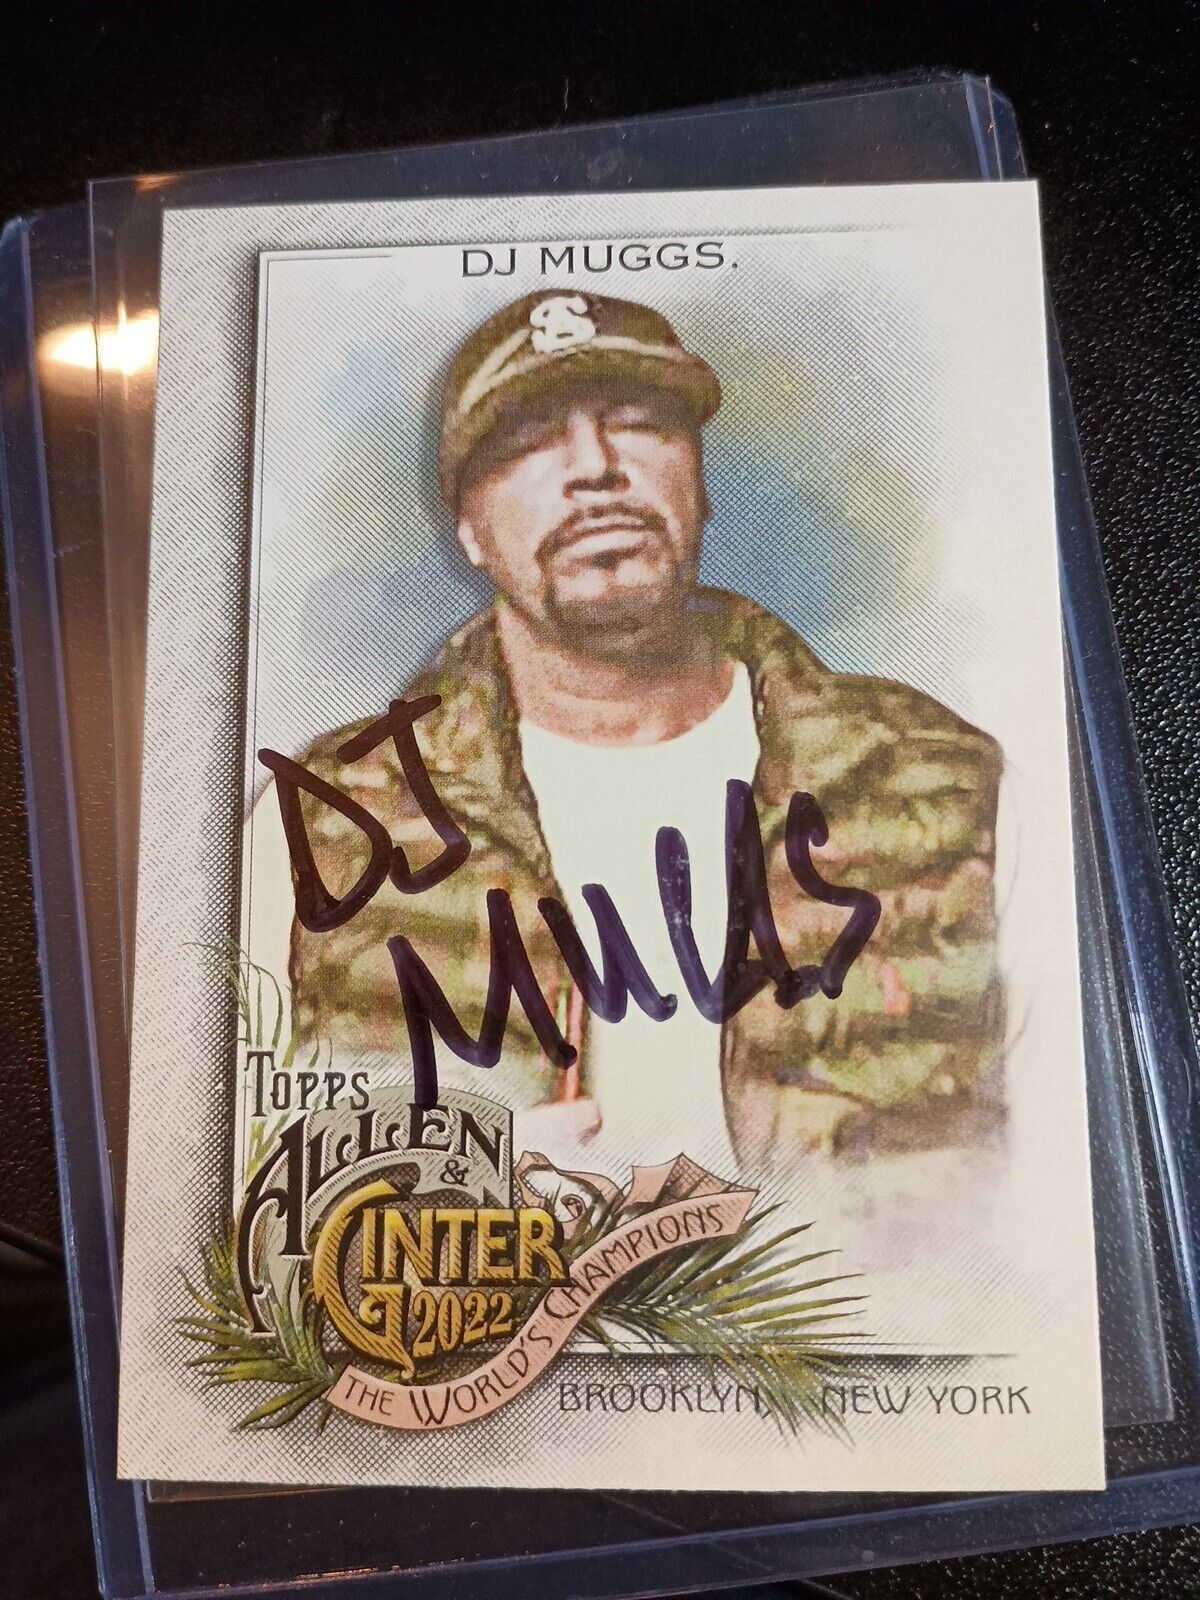 2022 Topps Allen and Ginter DJ Muggs Signed Base #276 Cypress Hill